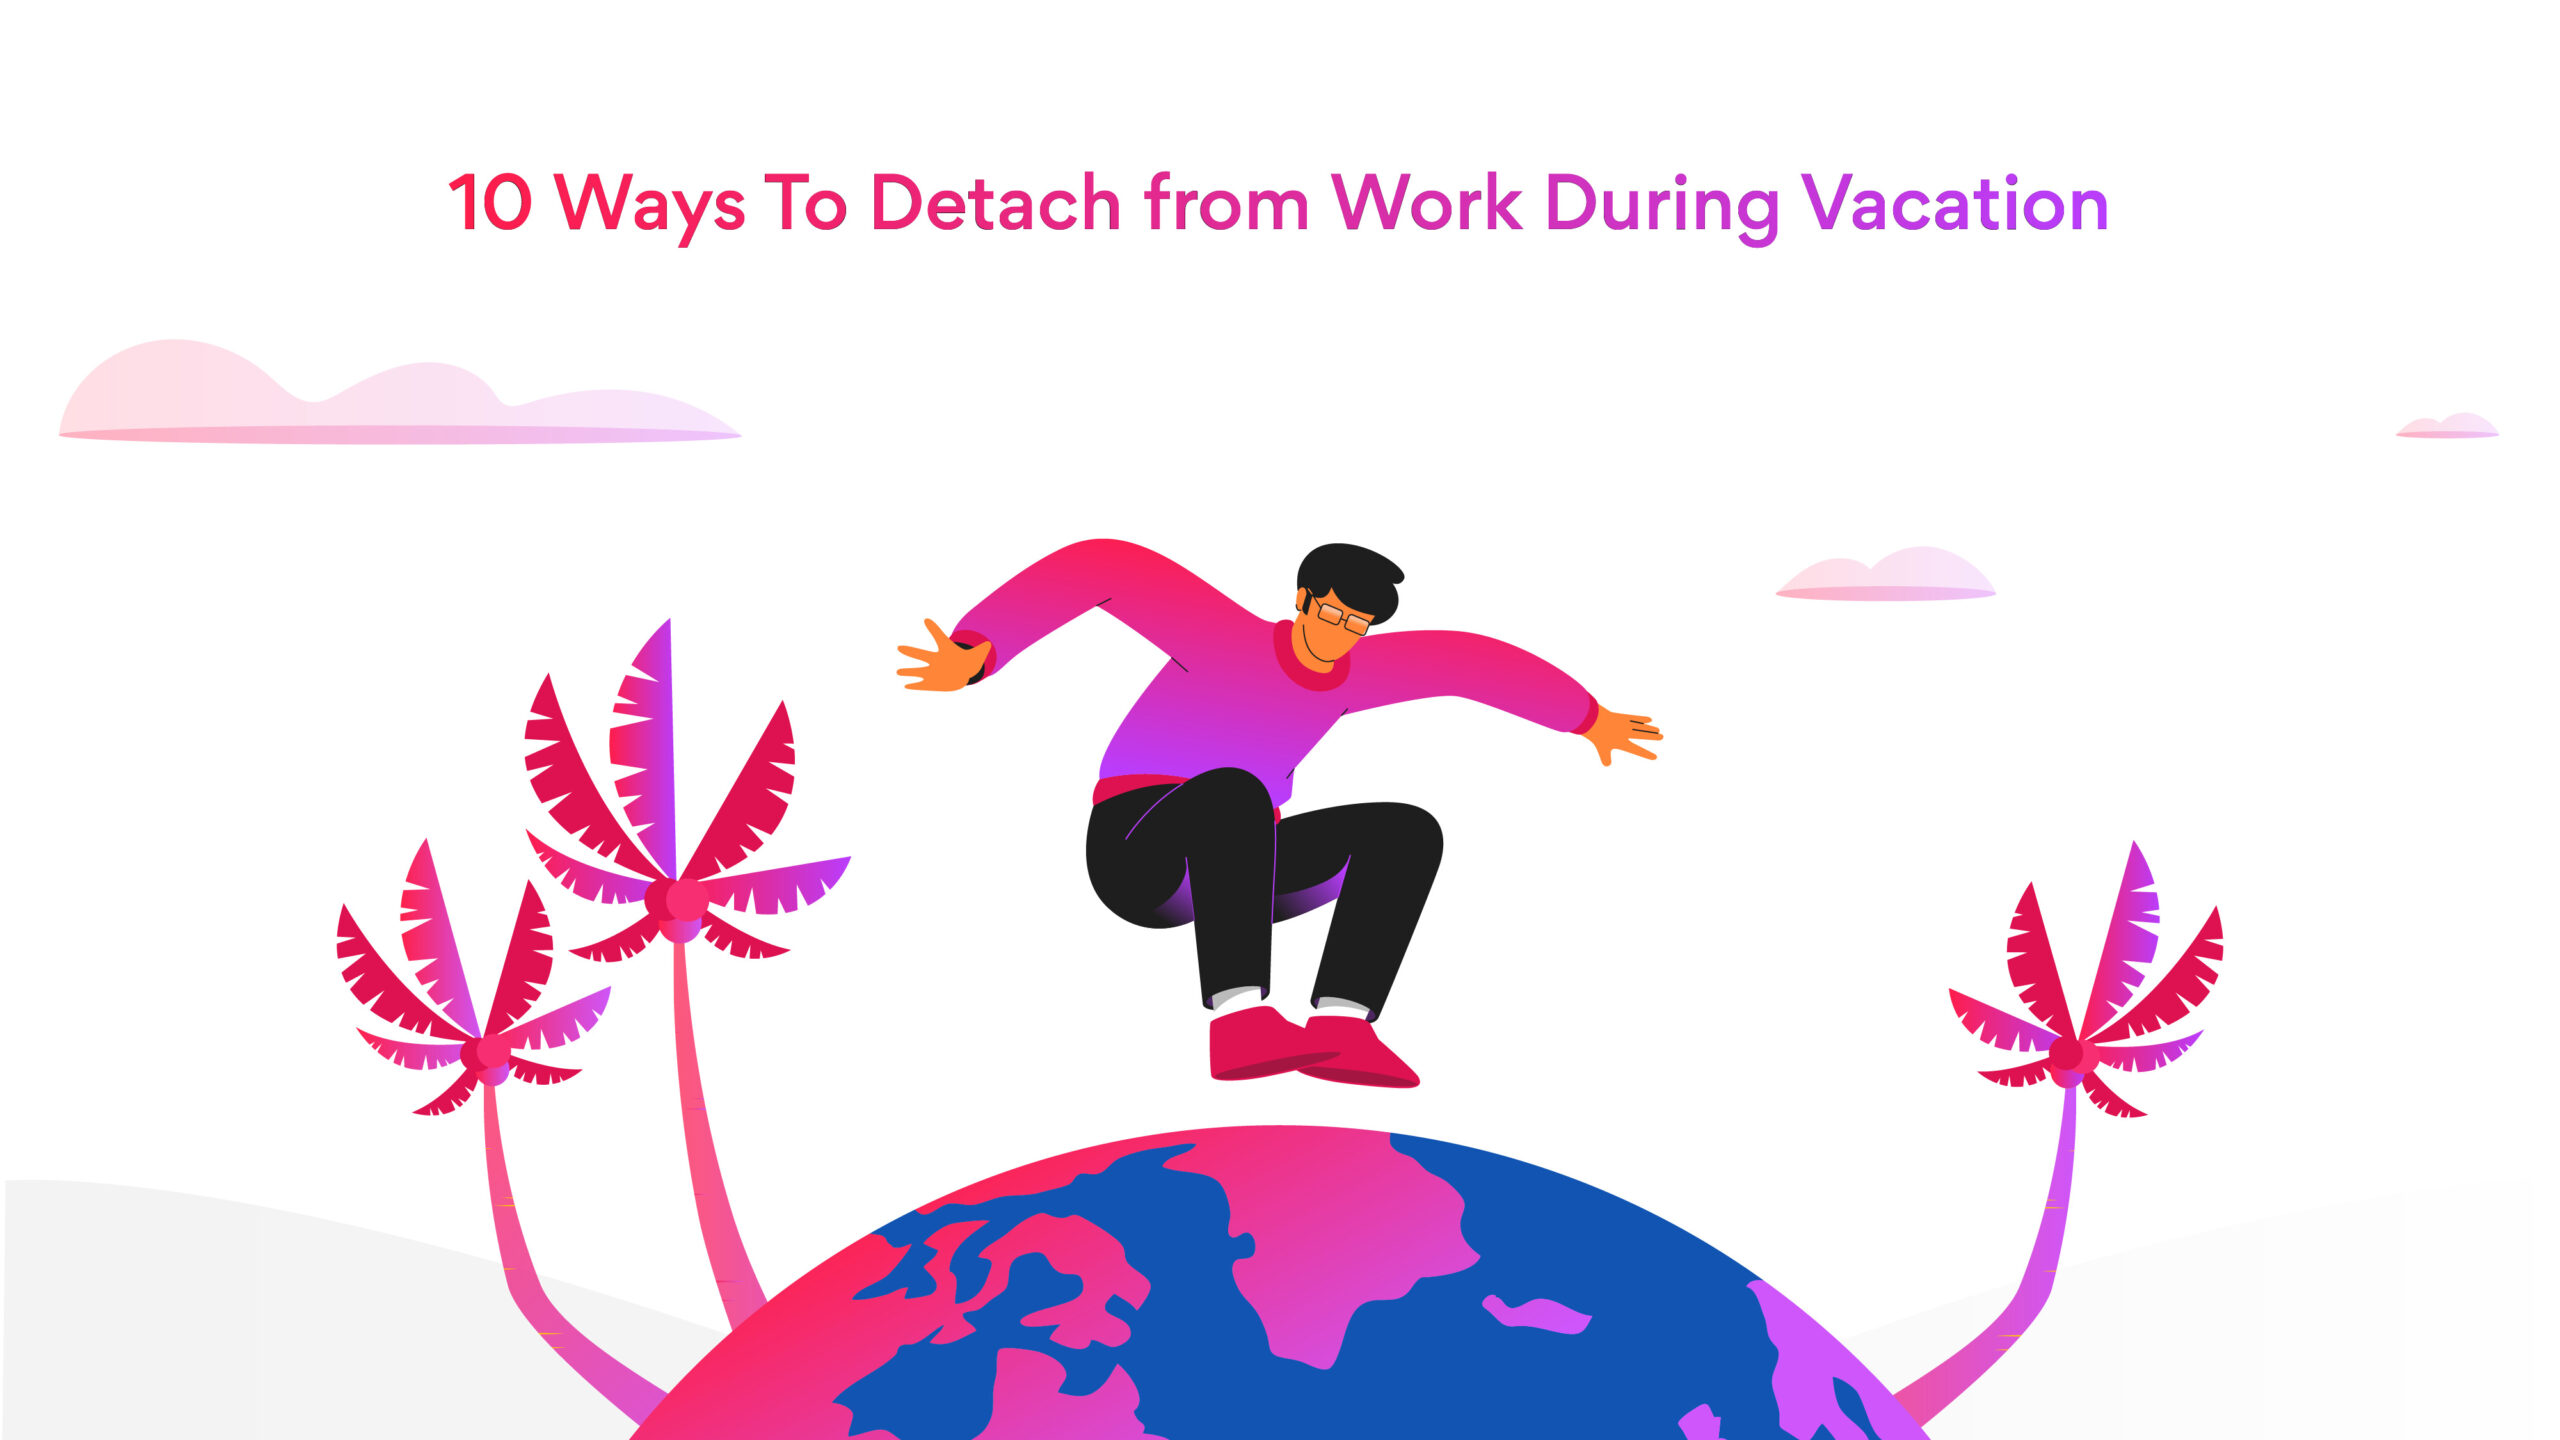 10 Tips to Detach from Work on Vacation